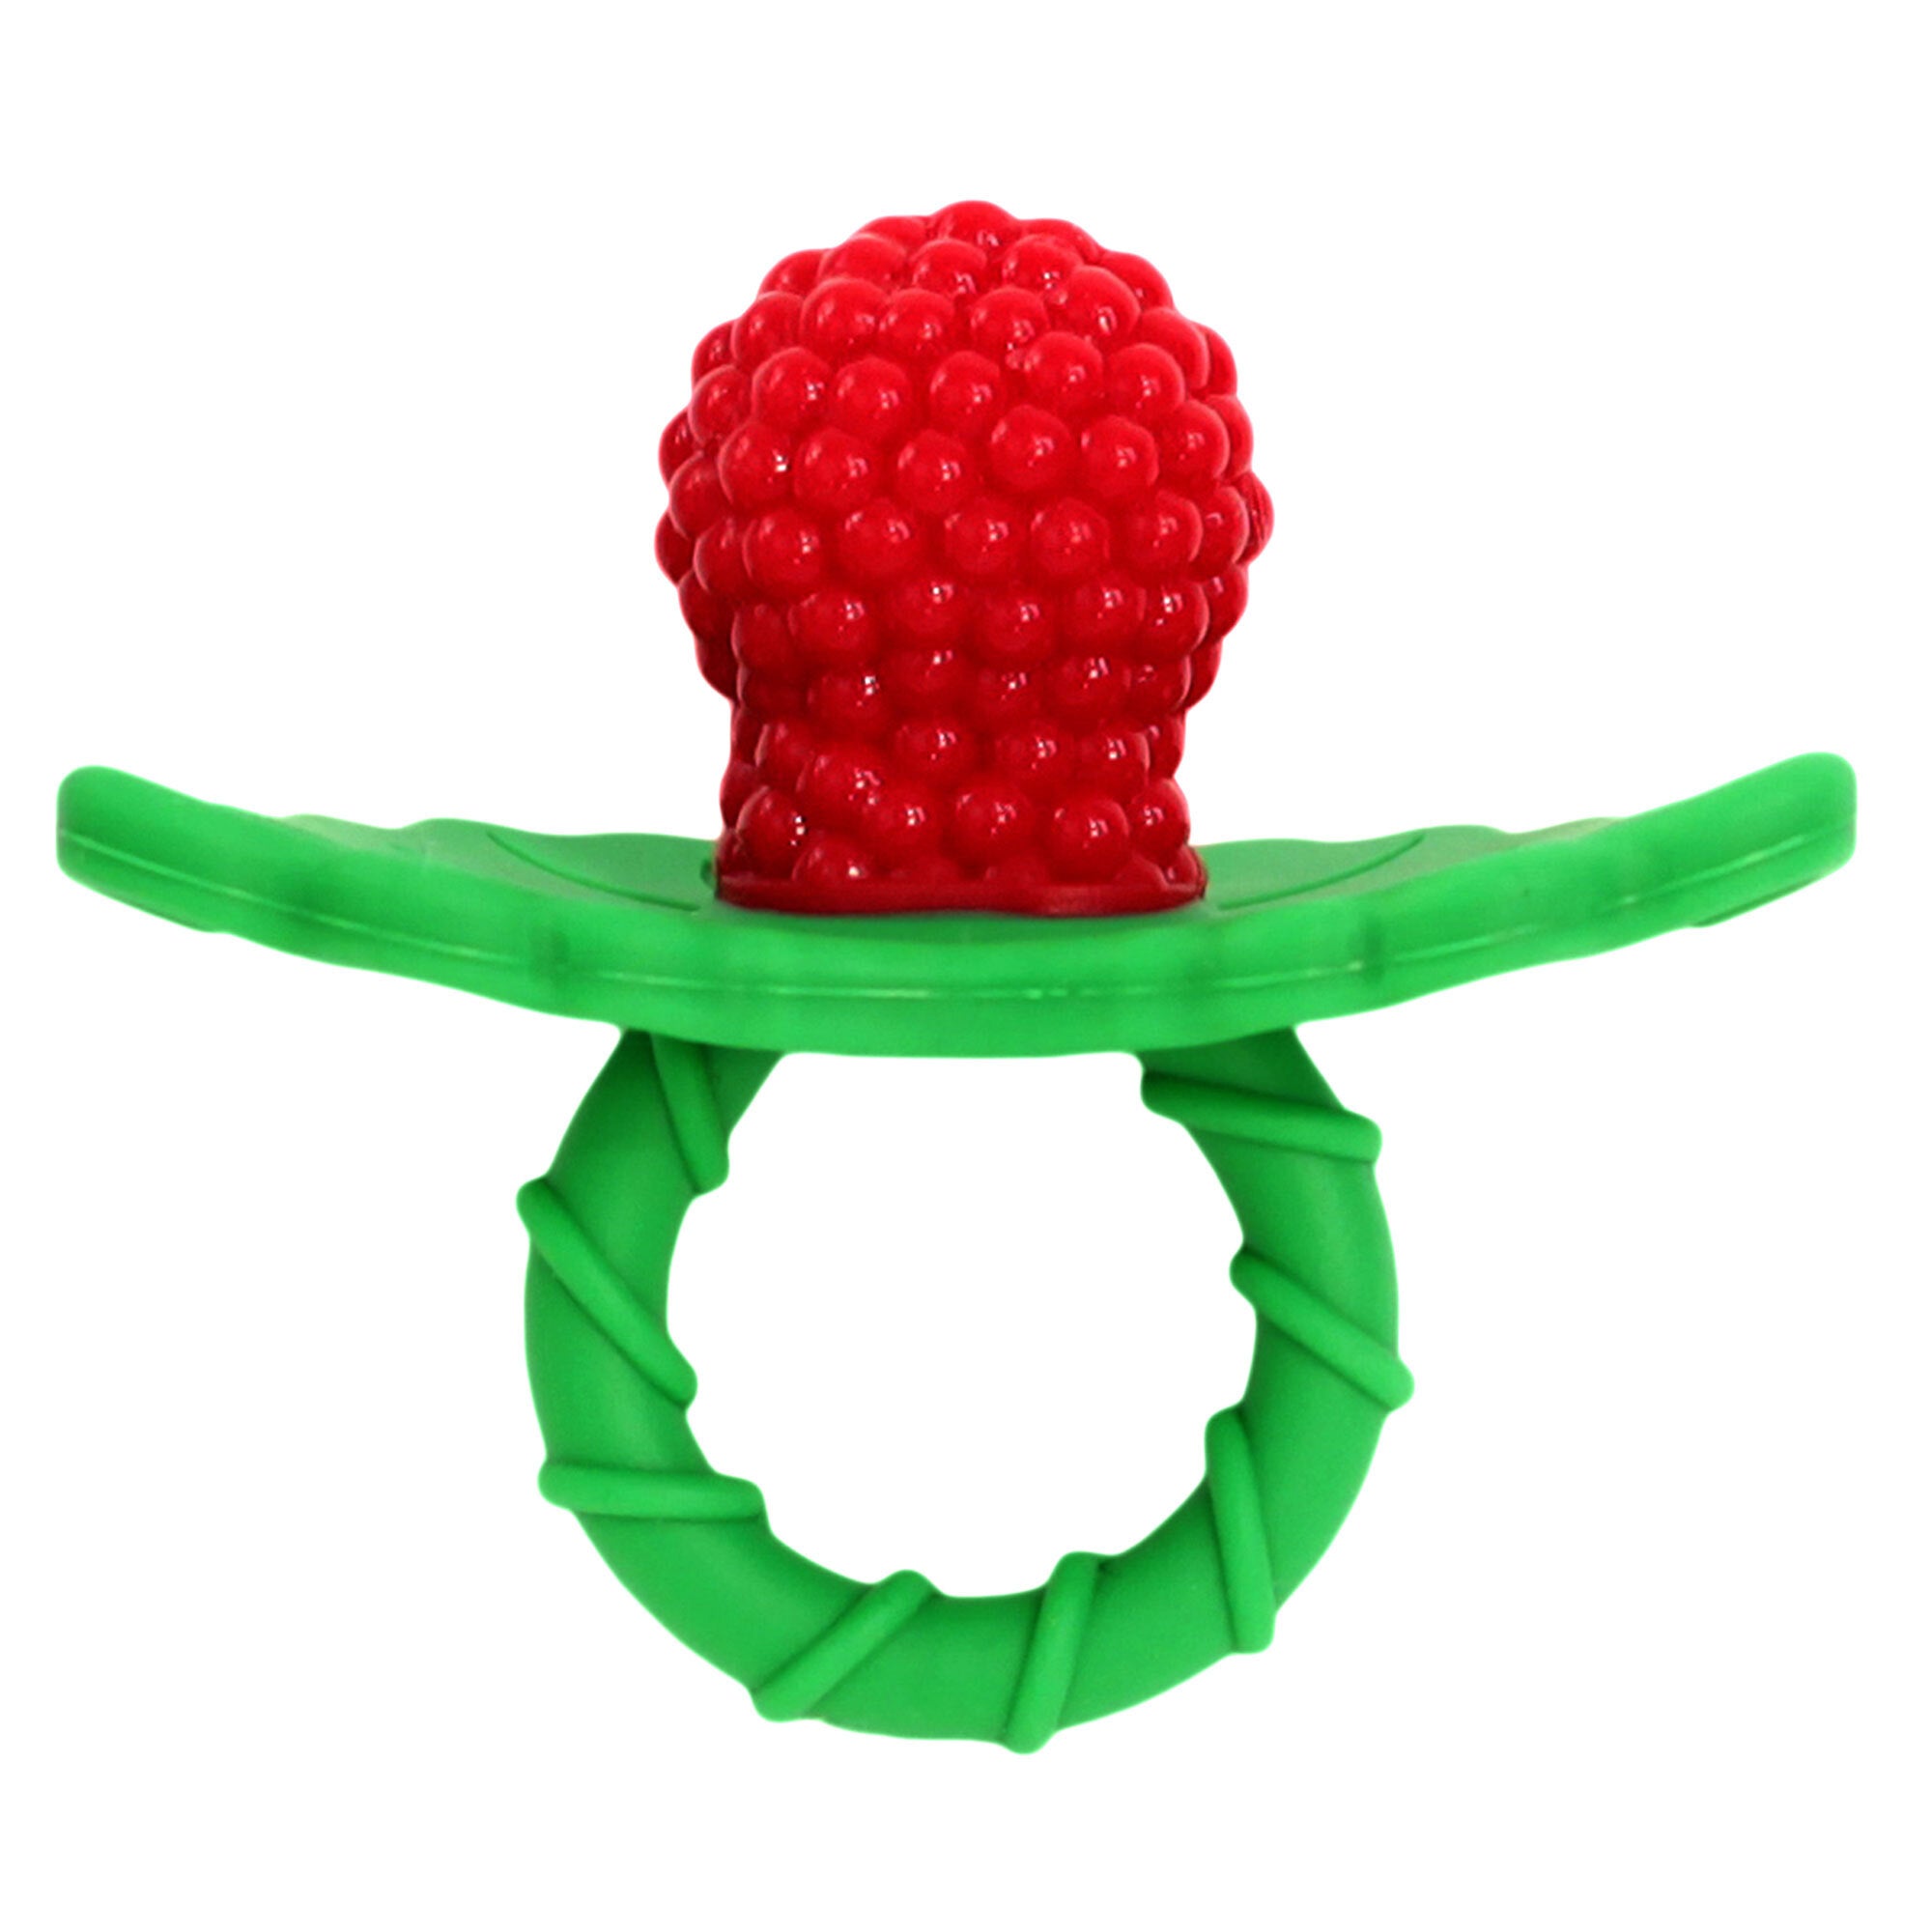 Red and Green raspberry 3 Count RaZbaby RaZzies Teether 